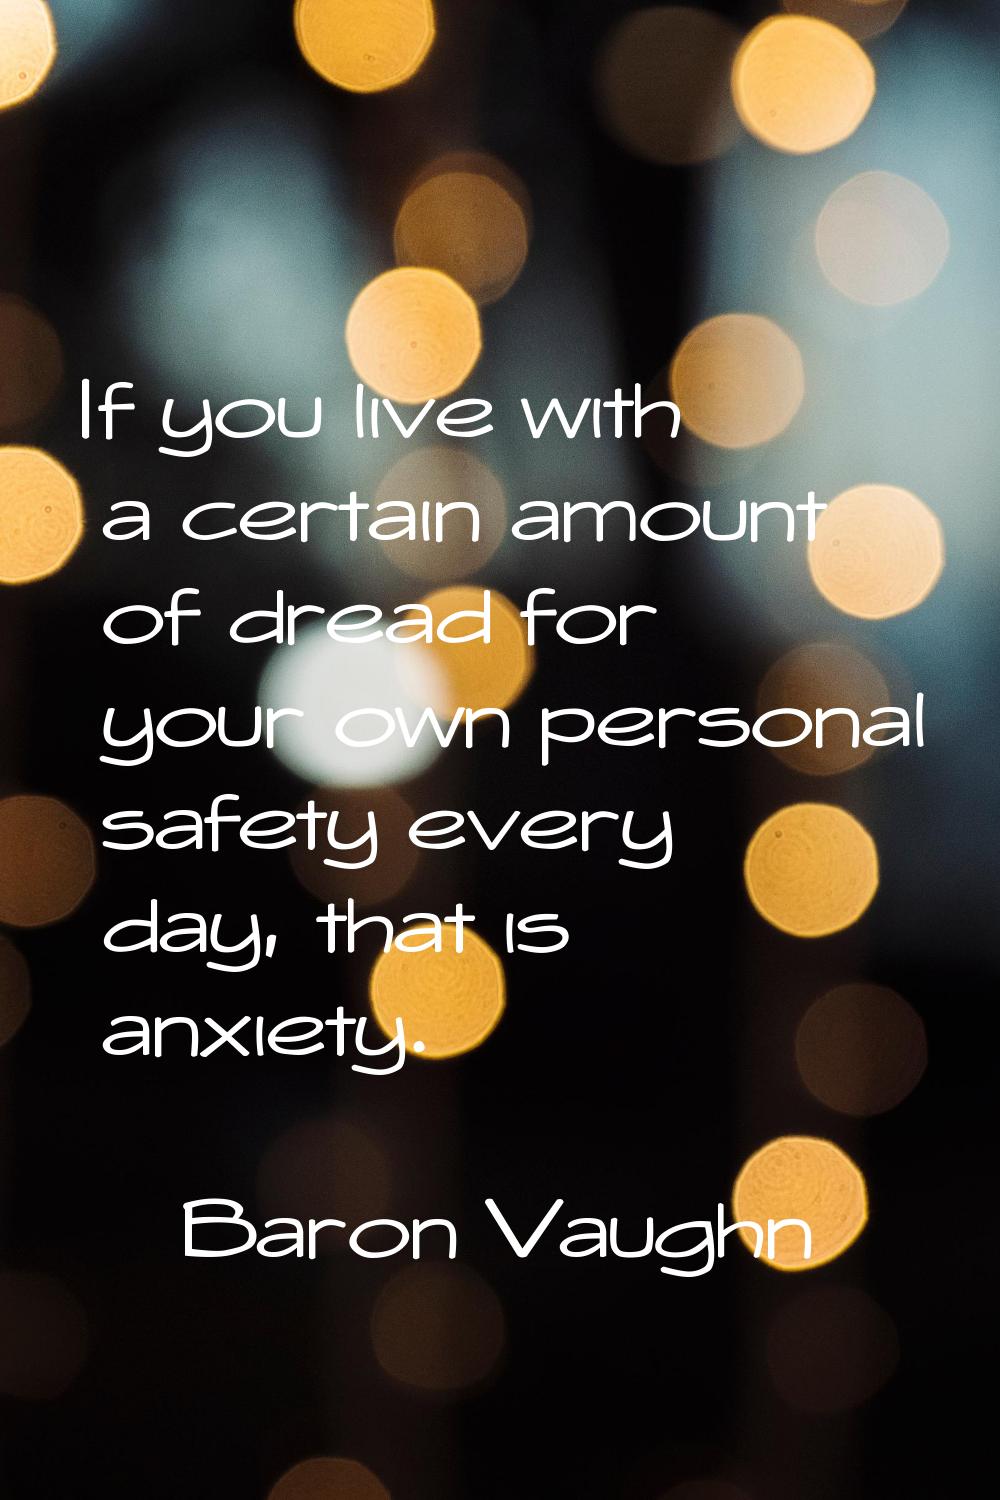 If you live with a certain amount of dread for your own personal safety every day, that is anxiety.